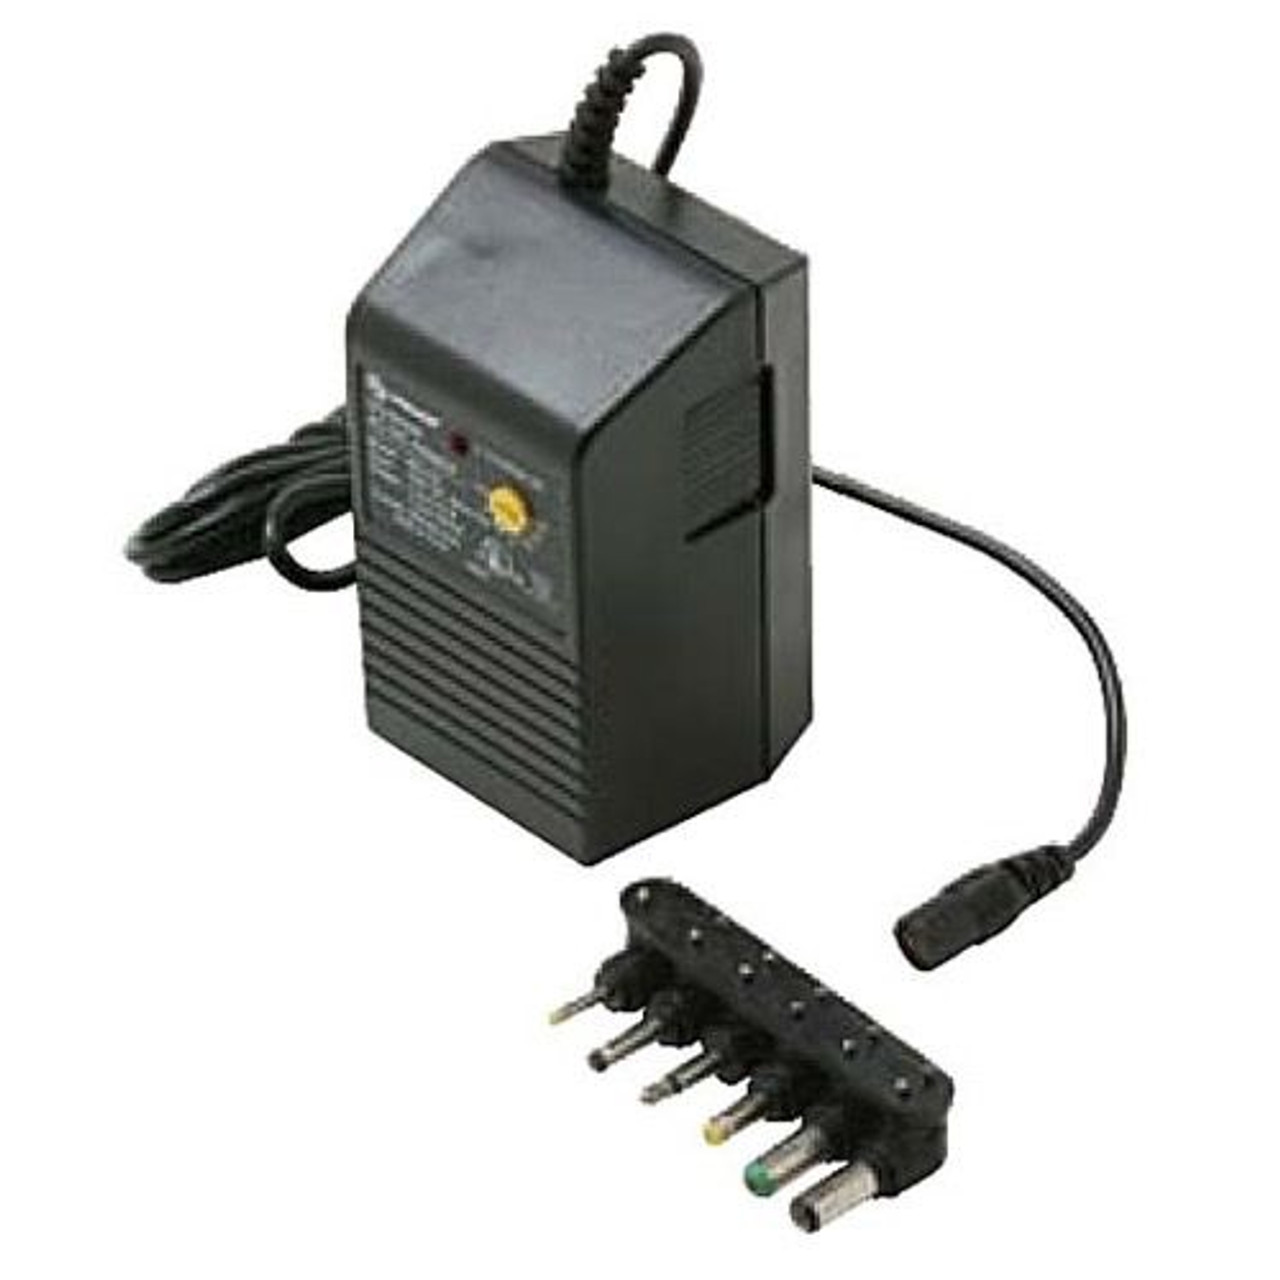 Eagle Universal Power Supply Adapter 300 mA AC/DC with 6 Detachable Plugs Converter Volt UL Transformer 110 VAC 50-60 Hz Adapter with Switchable Voltage Outputs 1.5, 3, 4.5, 6, 7.5, 9, 12 VDC